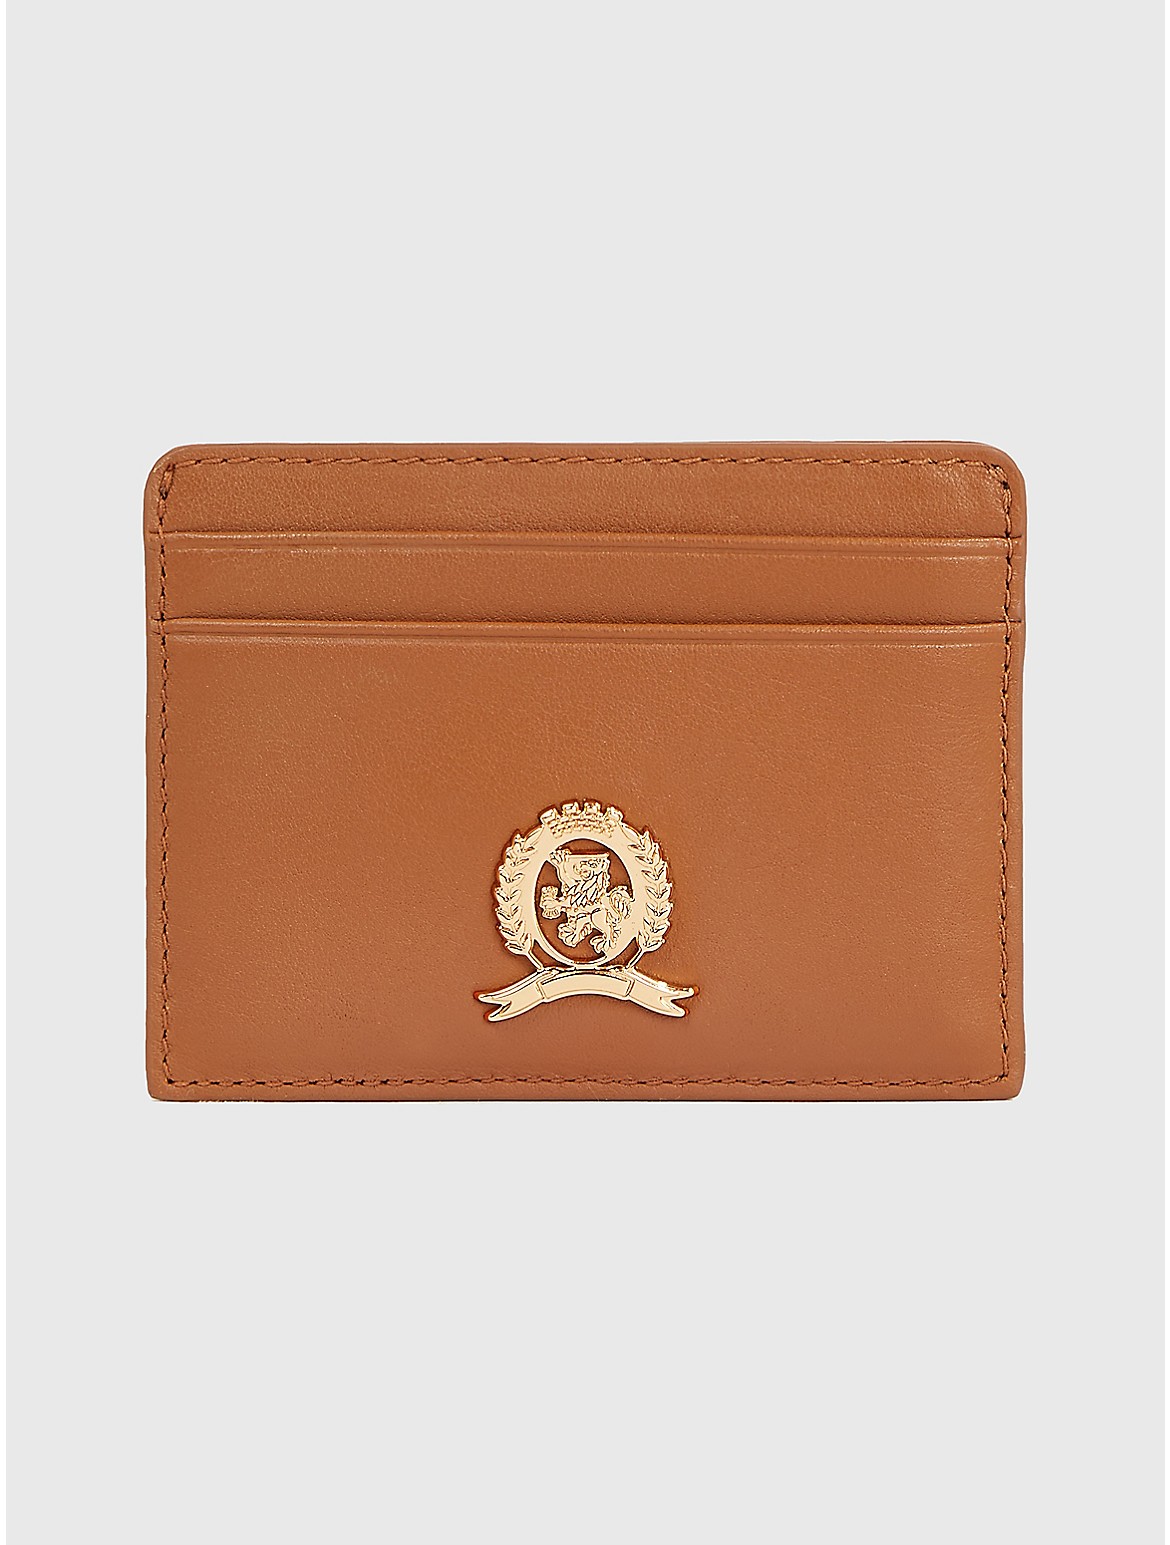 Tommy Hilfiger Women's Luxe Leather Credit Card Holder - Brown